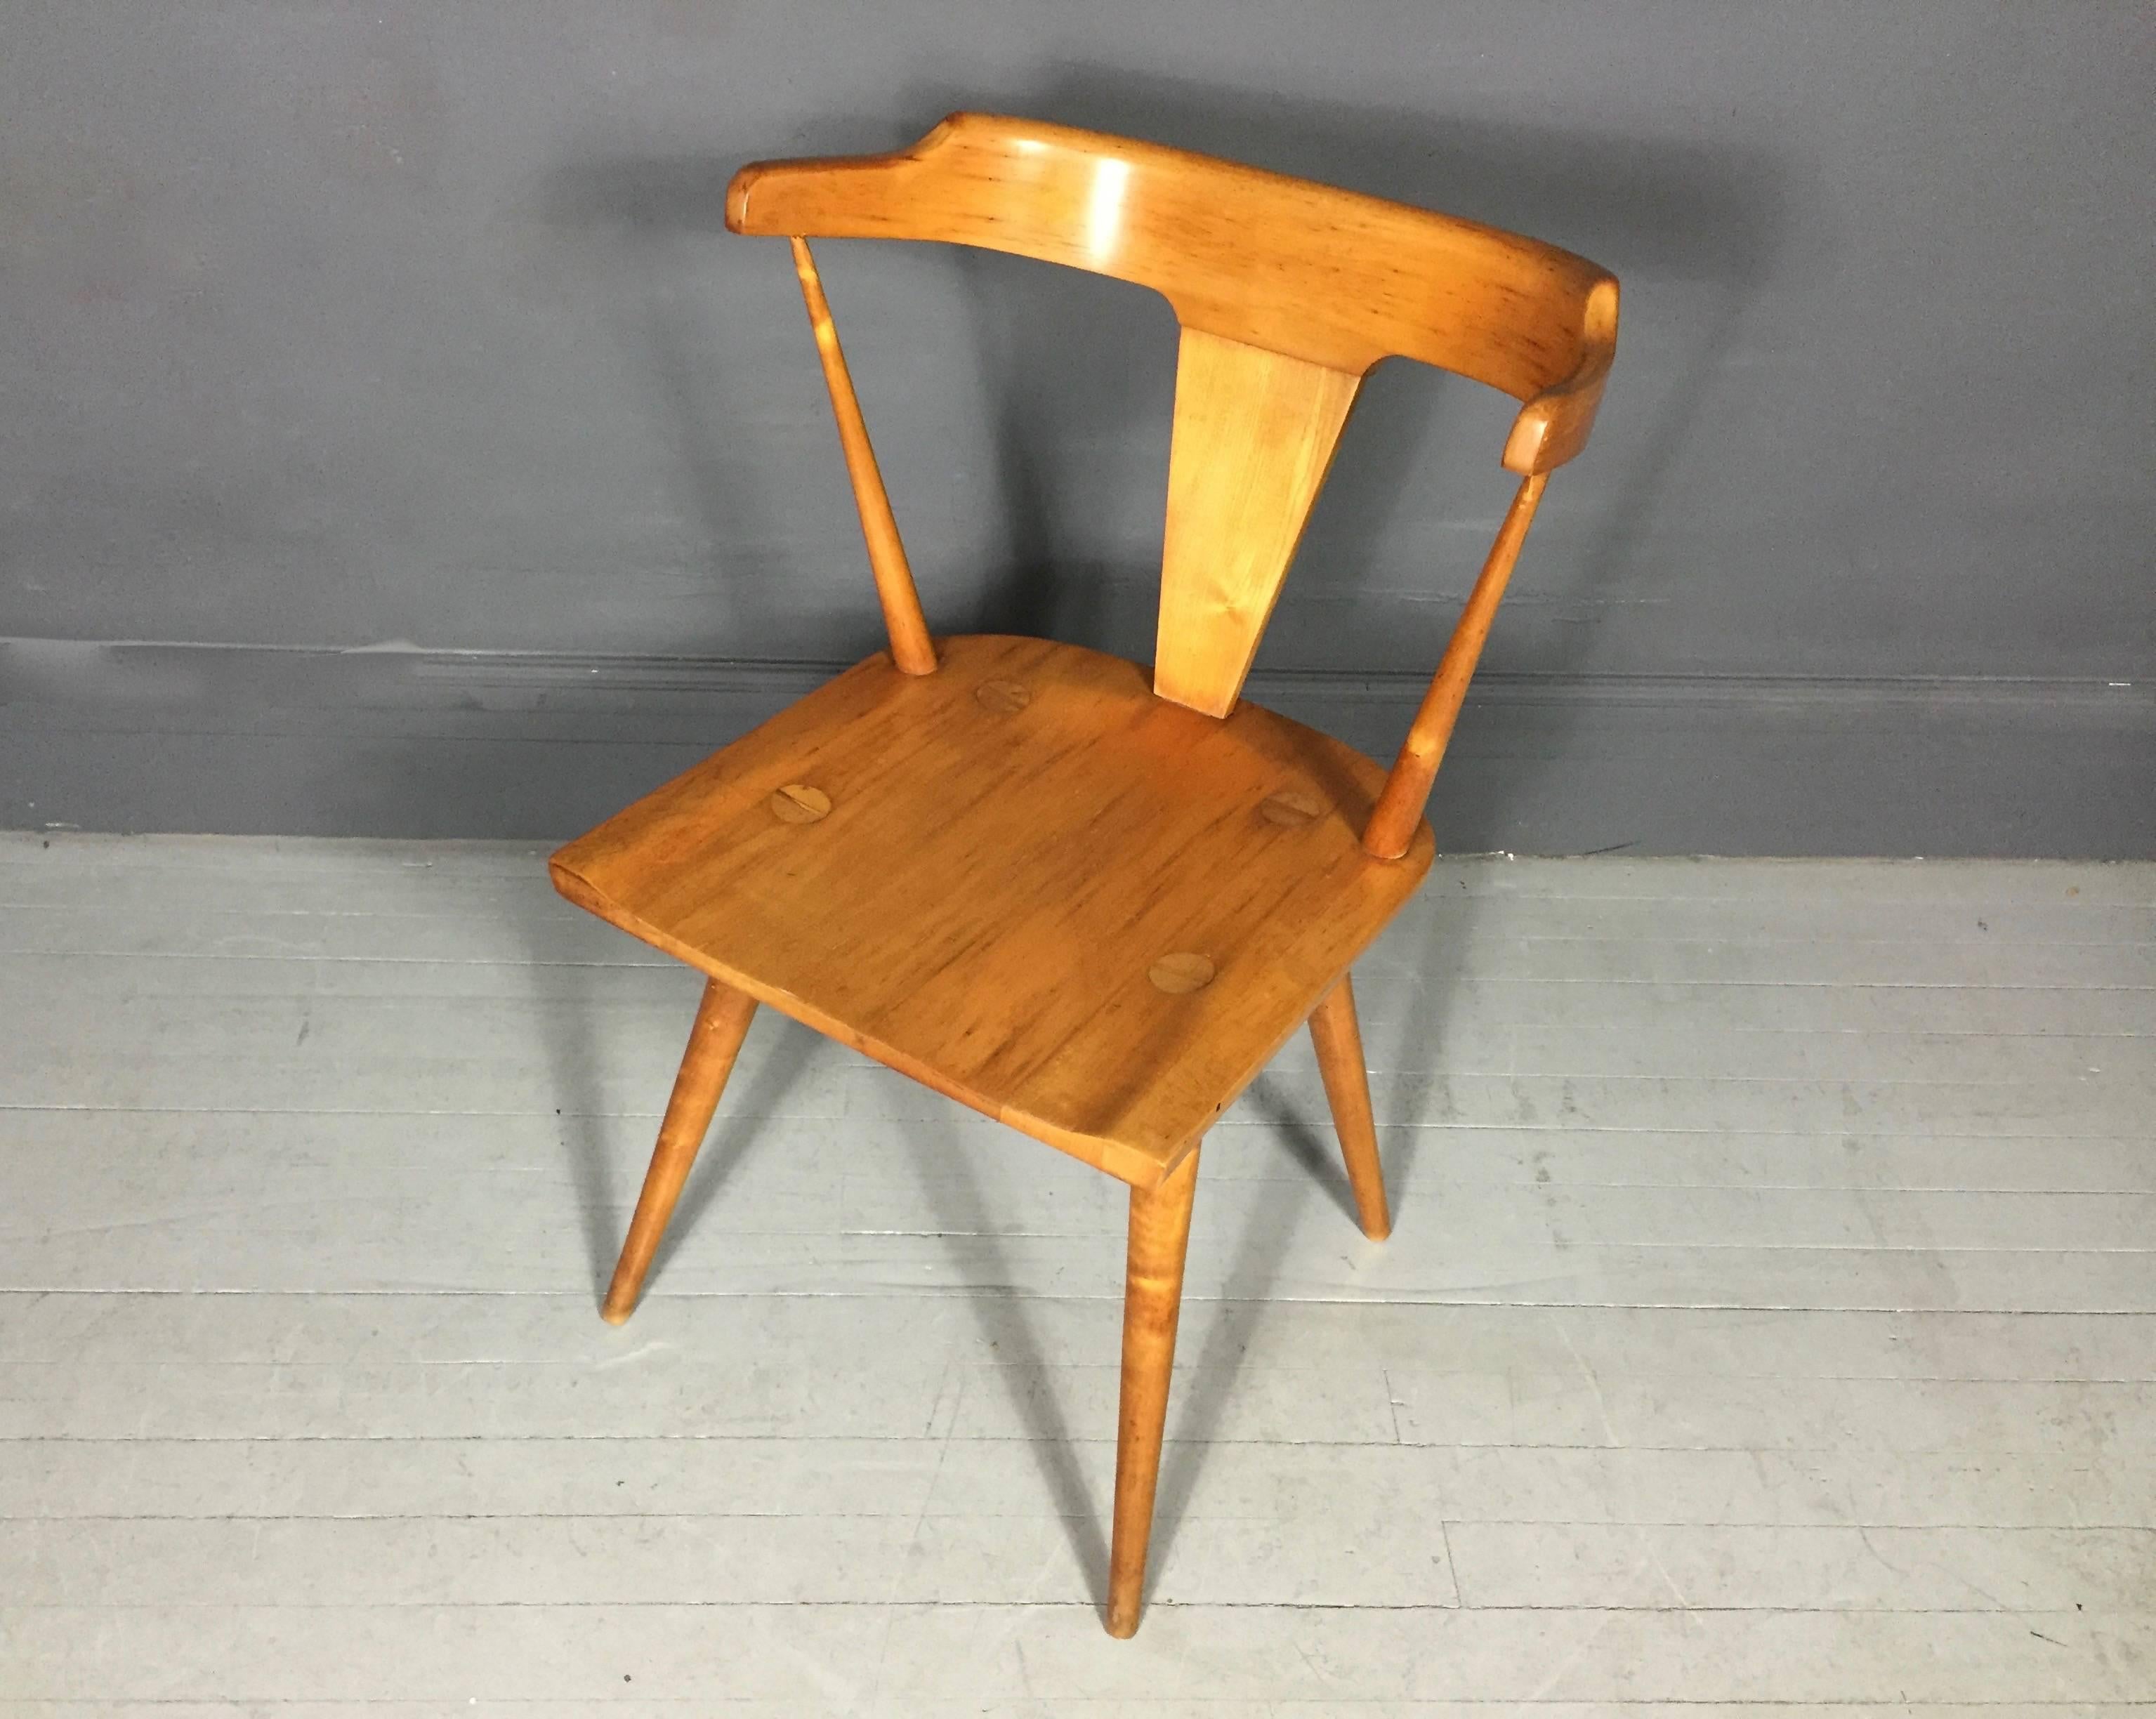 Mid-20th Century Solid Birch Dining Chair by Paul McCobb for Planner Group, USA 1950s